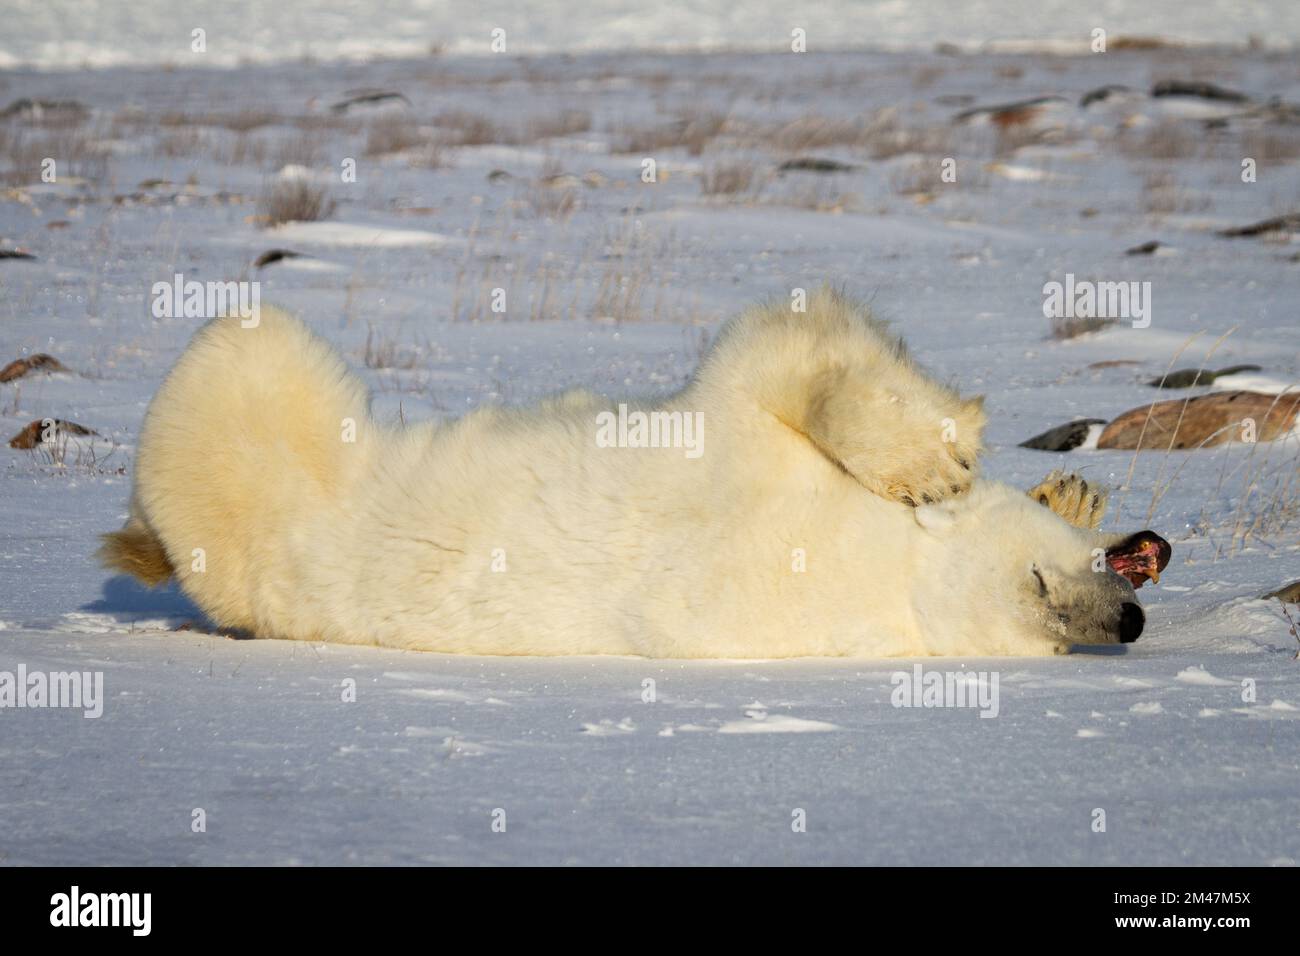 A polar bear rolling around in the snow with legs in the air while yawning or growling, near Churchill, Manitoba Canada Stock Photo